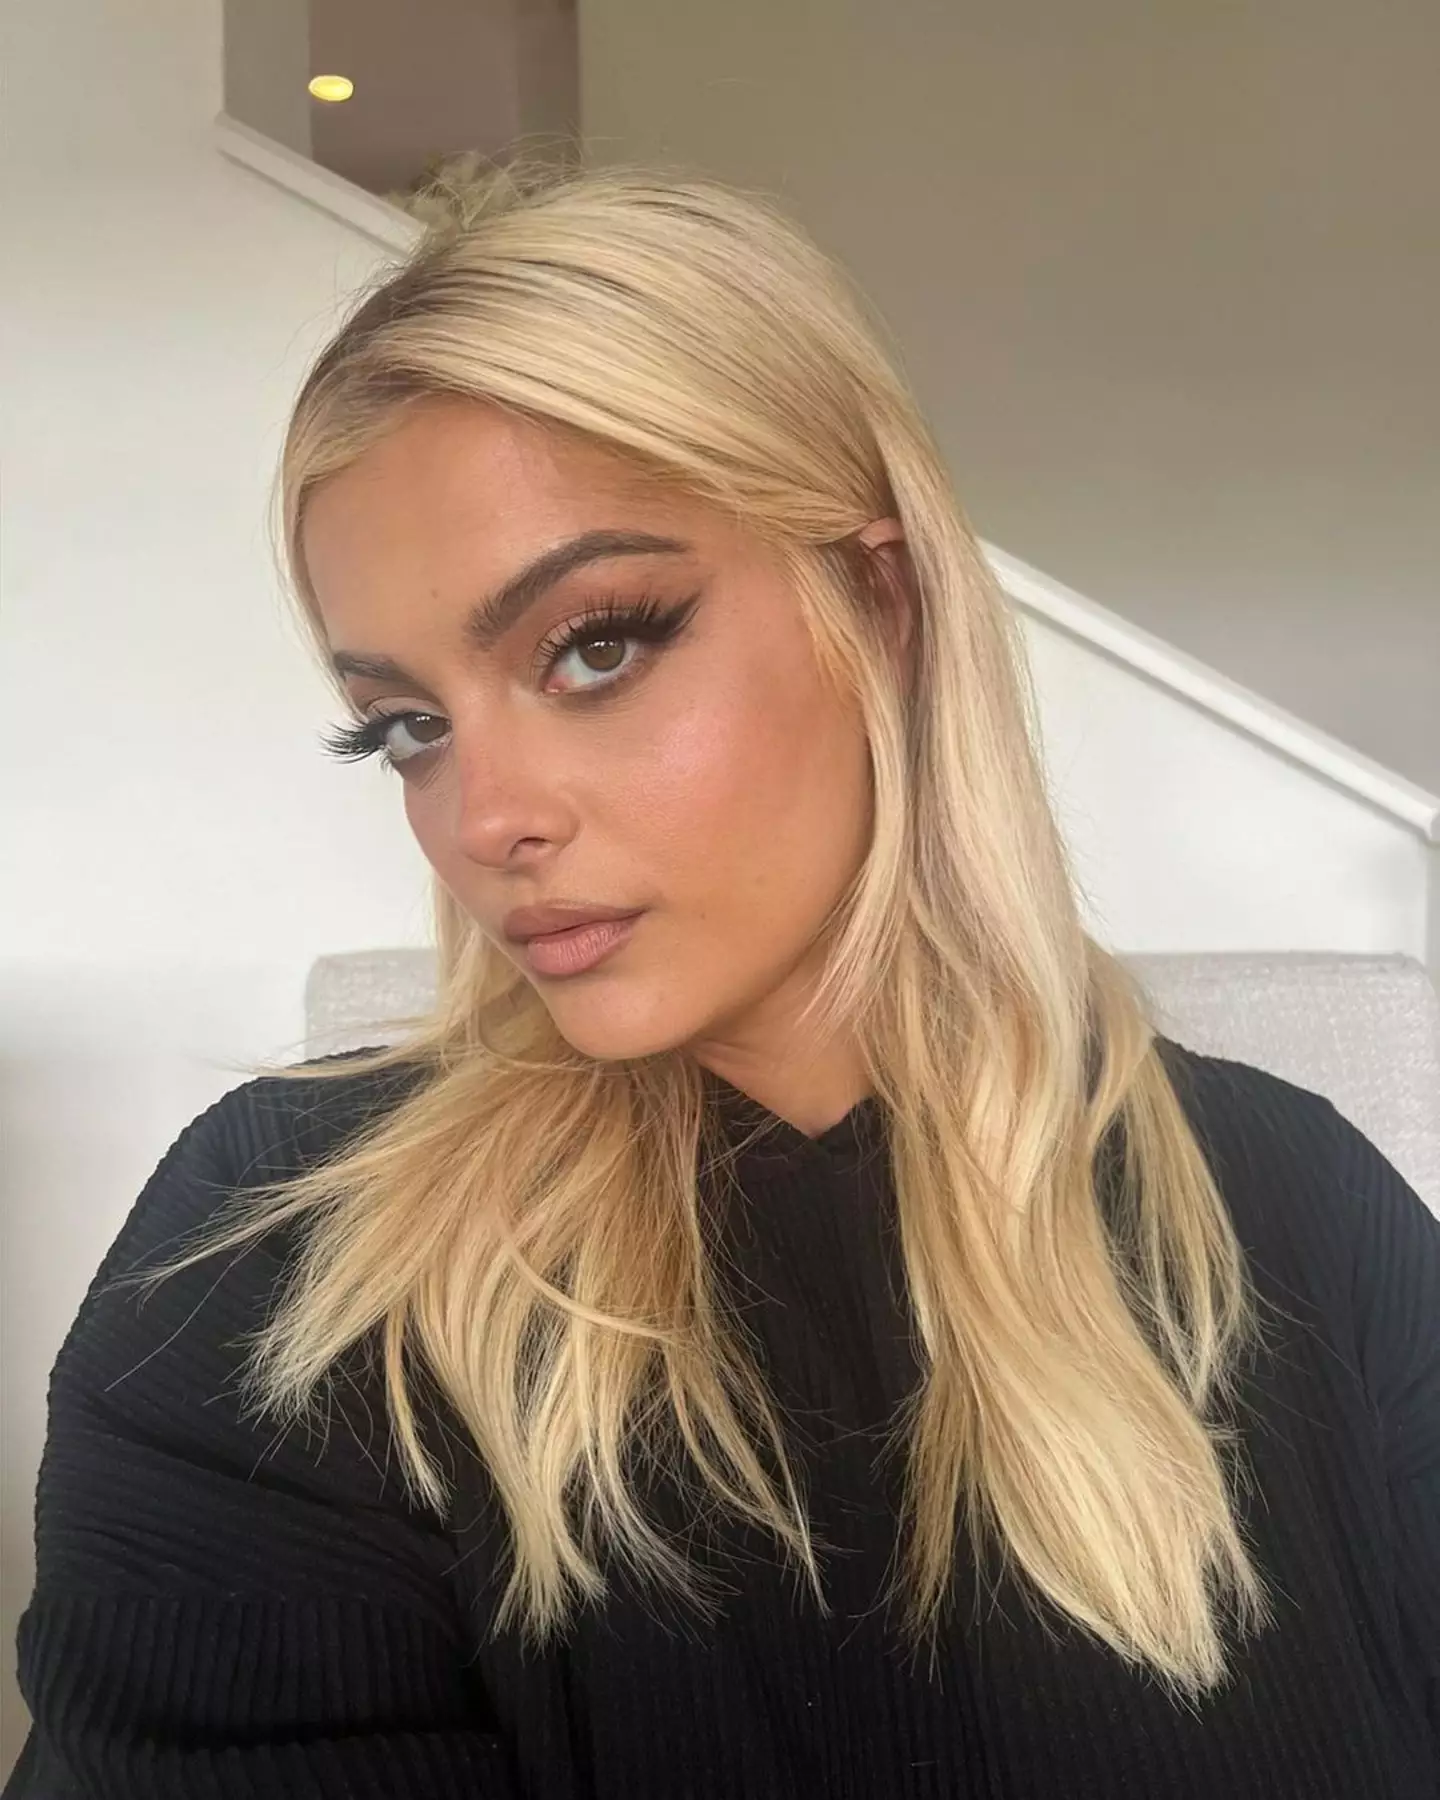 Bebe Rexha was performing in New York City when the incident took place.